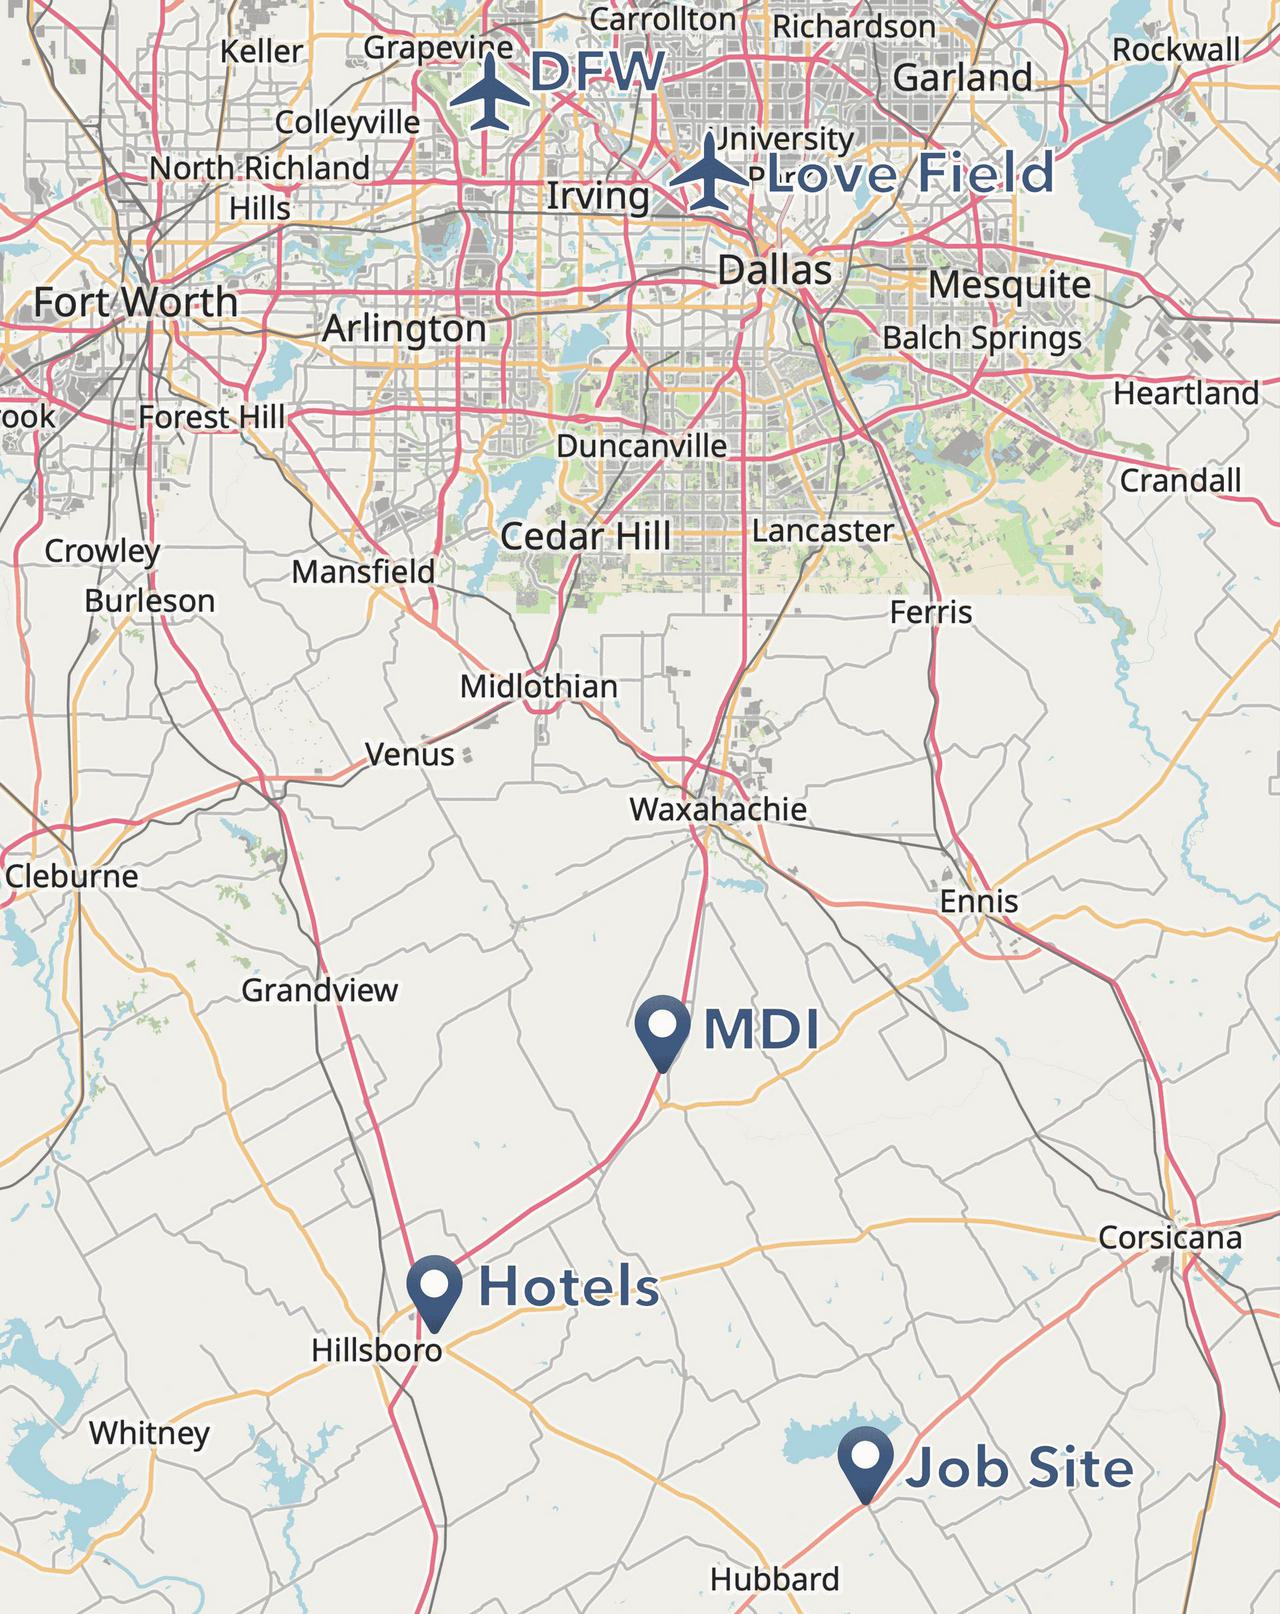 Map of DFW area.